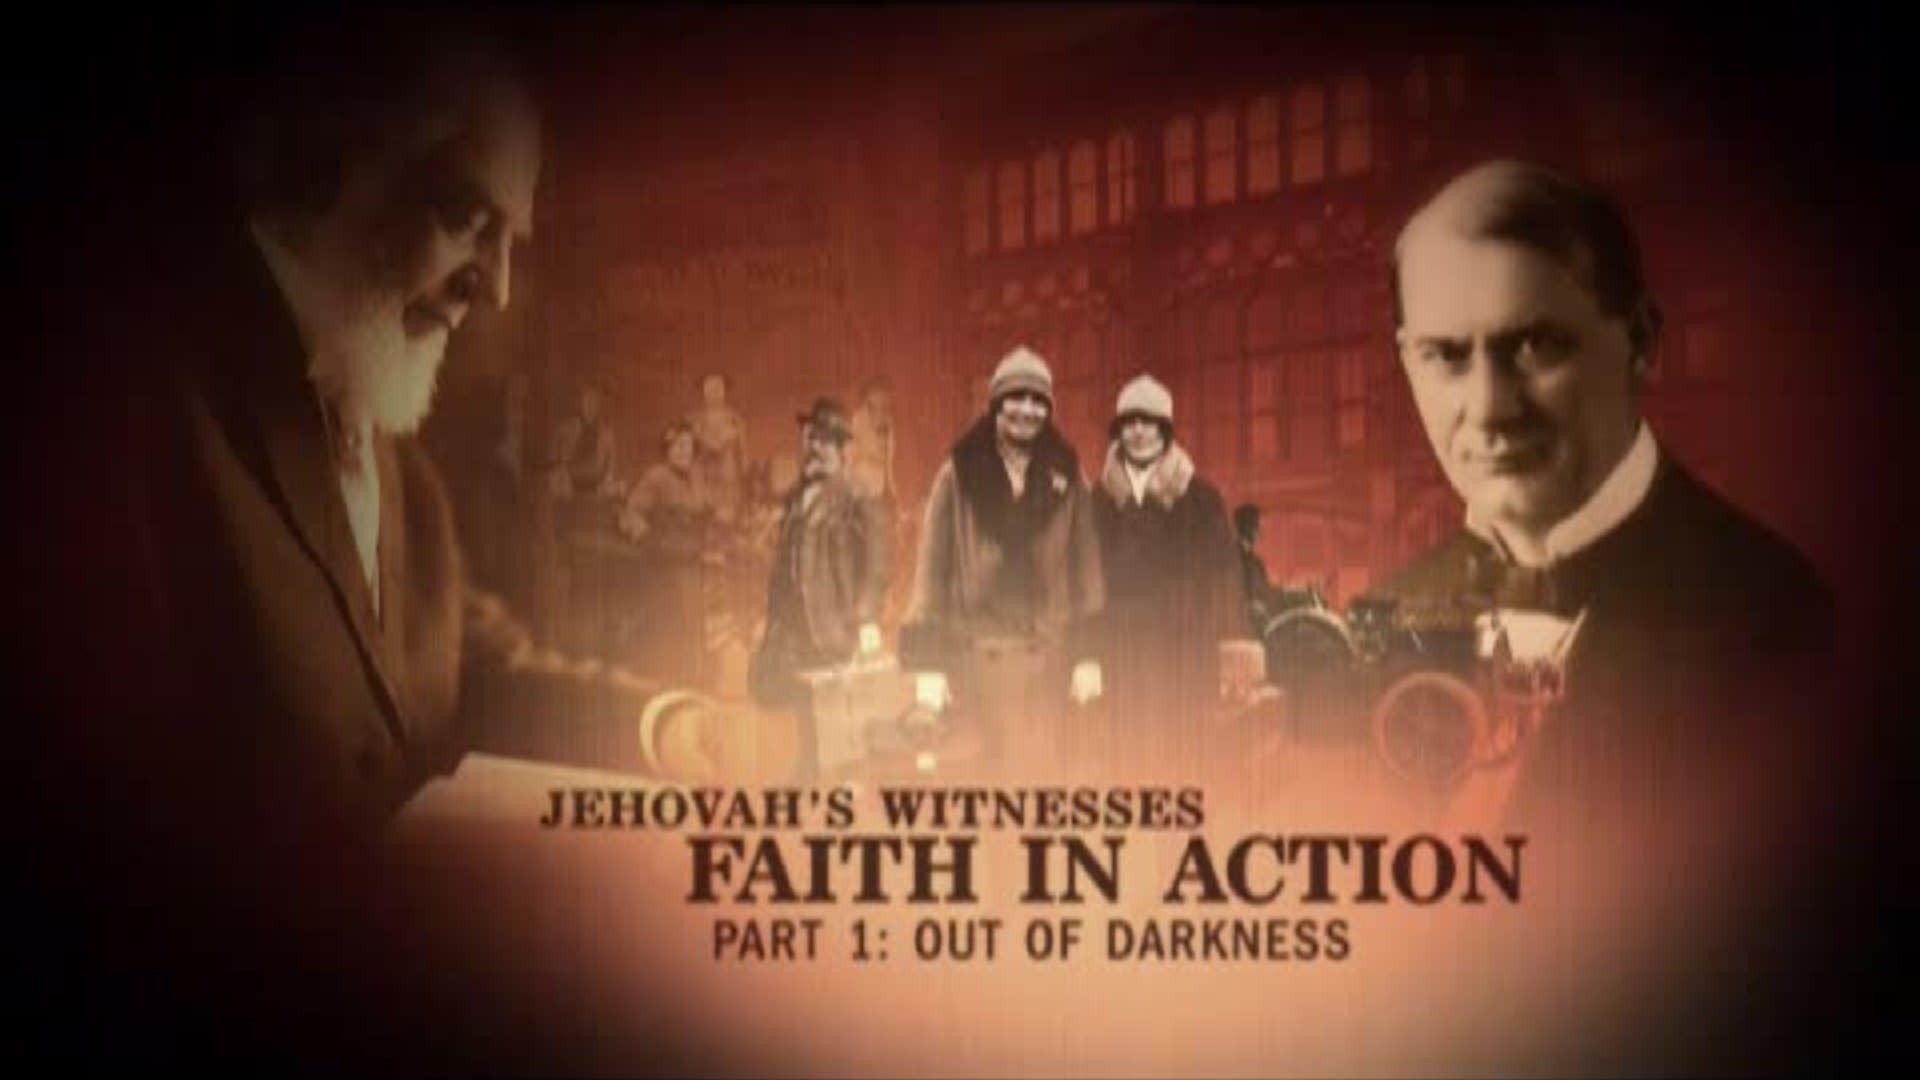 1920x1080 Jehovah's Witnesses - Faith In Action, Part 1: Out Of Darkness (2010 .